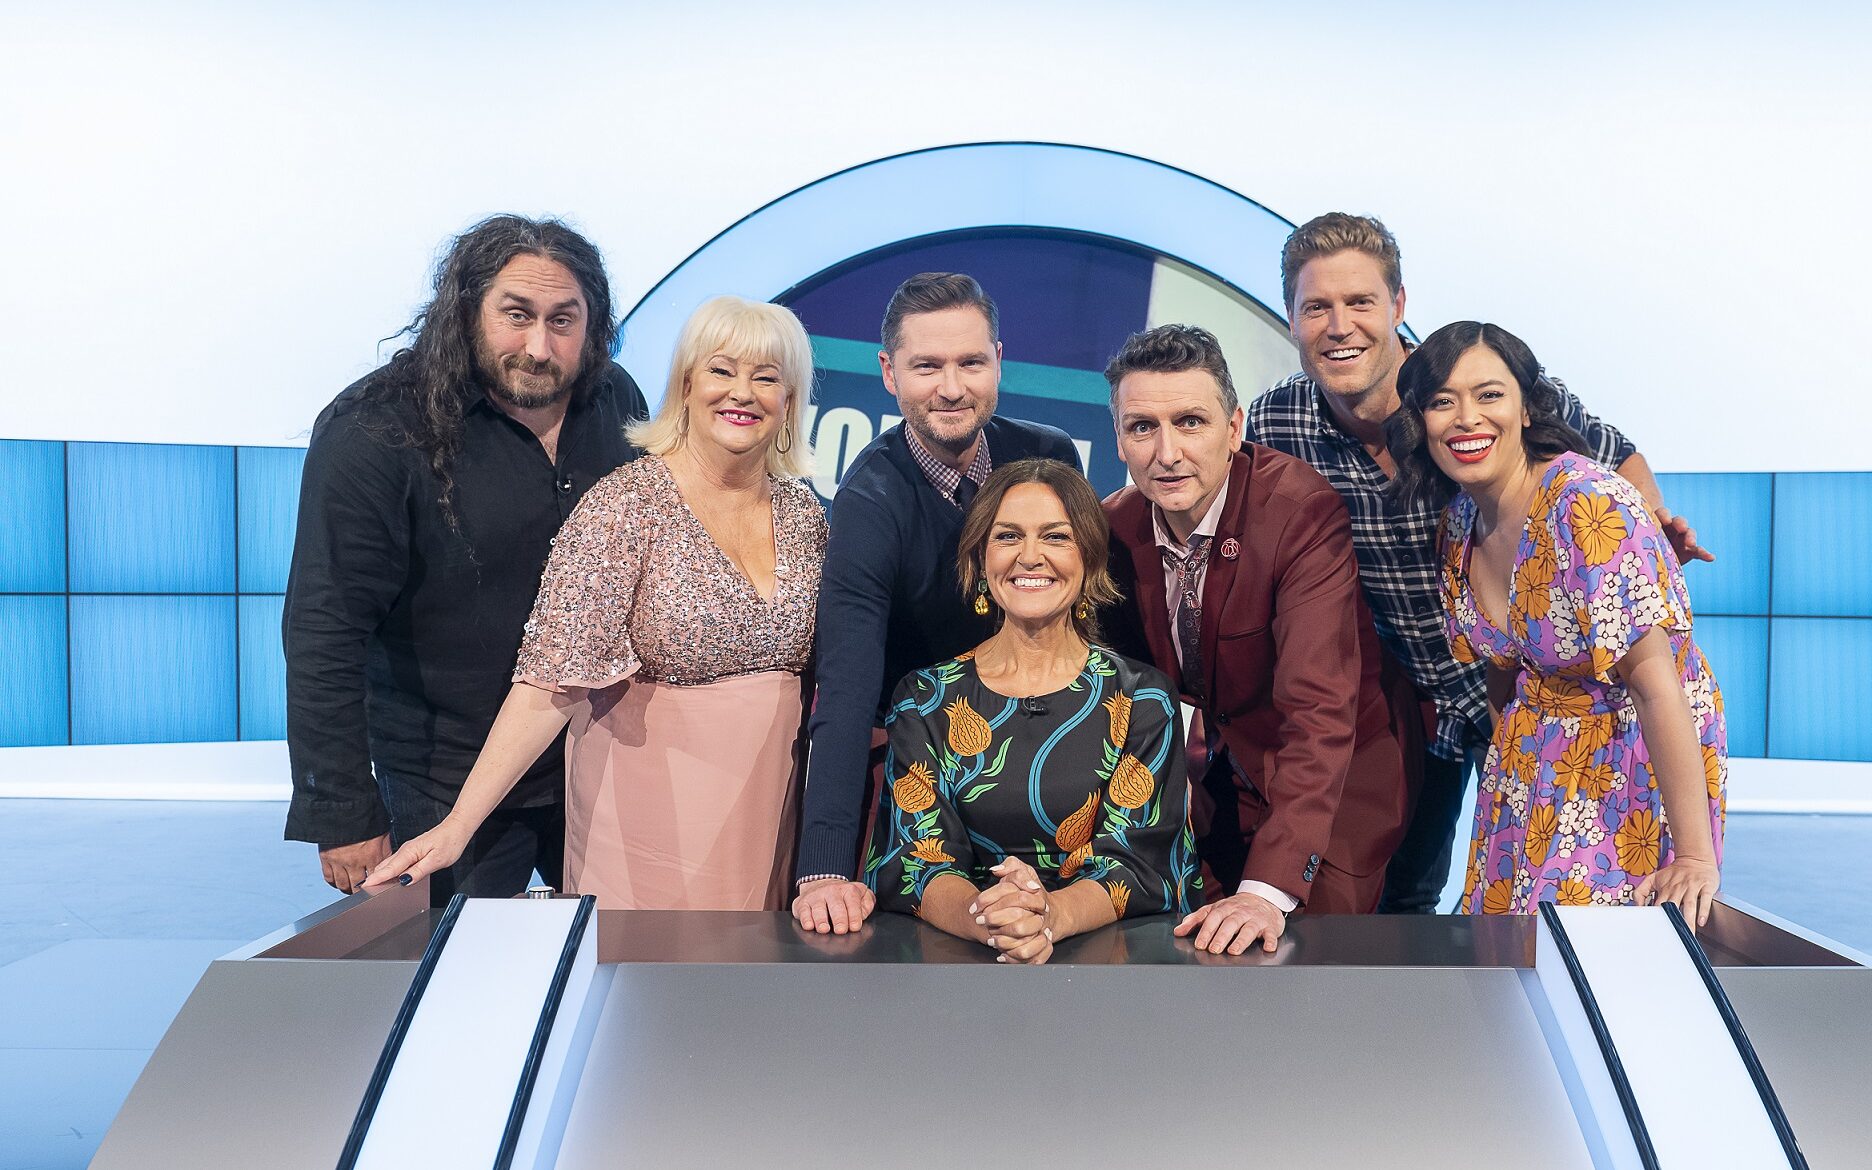 Would I Lie to You - Ross Noble, Bev Killick, Charlie Pickering, Chrissie Swan, Frank Woodley, Chris Brown and Alex Lee